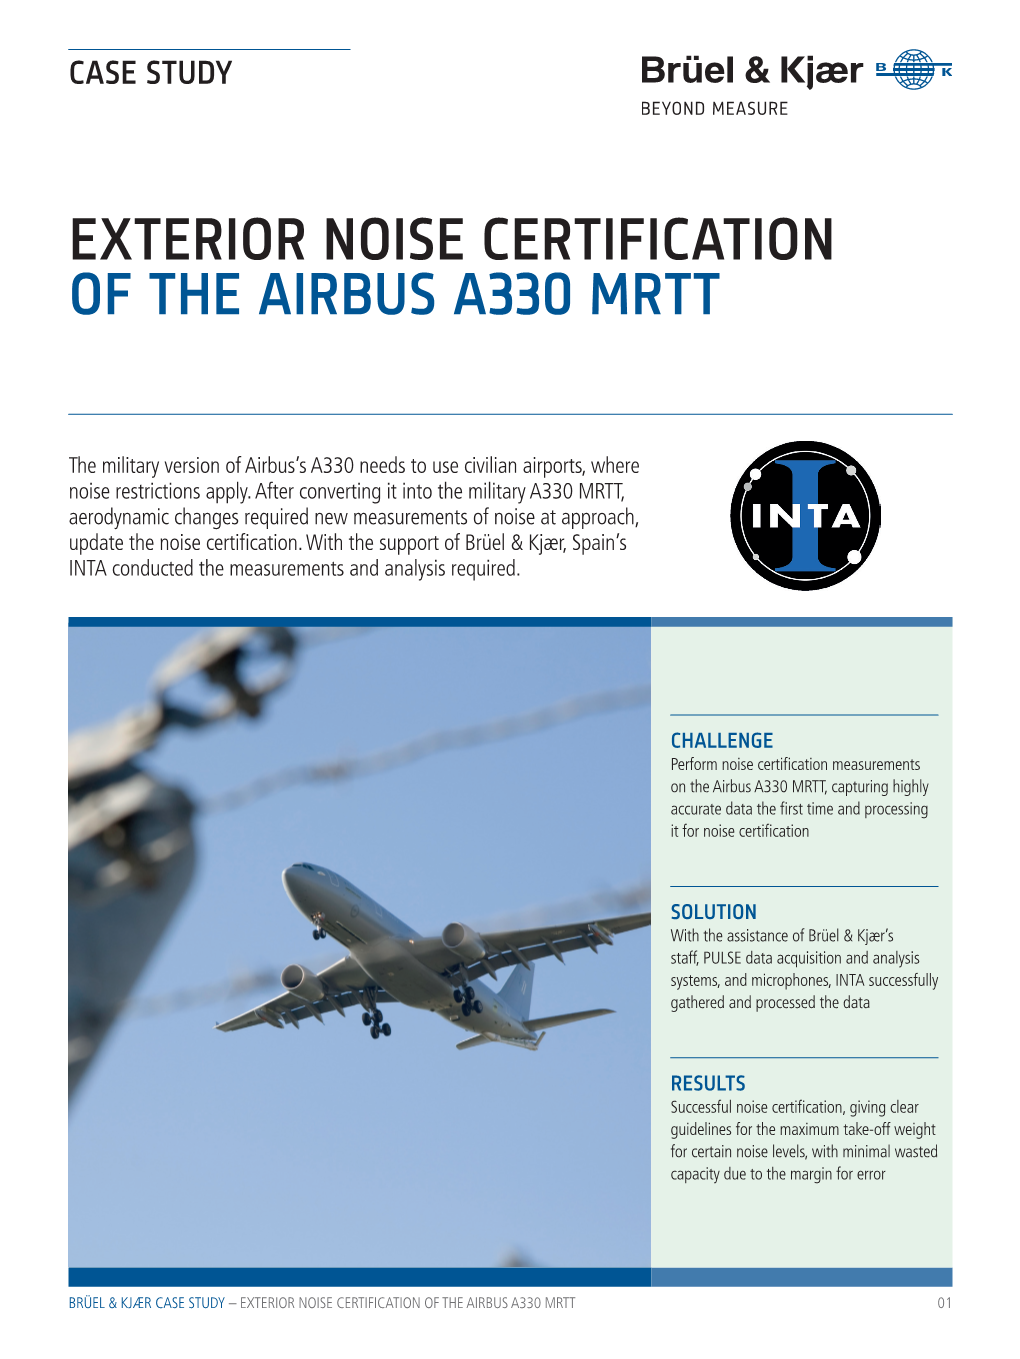 INTA, Exterior Noise Certification of the Airbus A330 MRTT